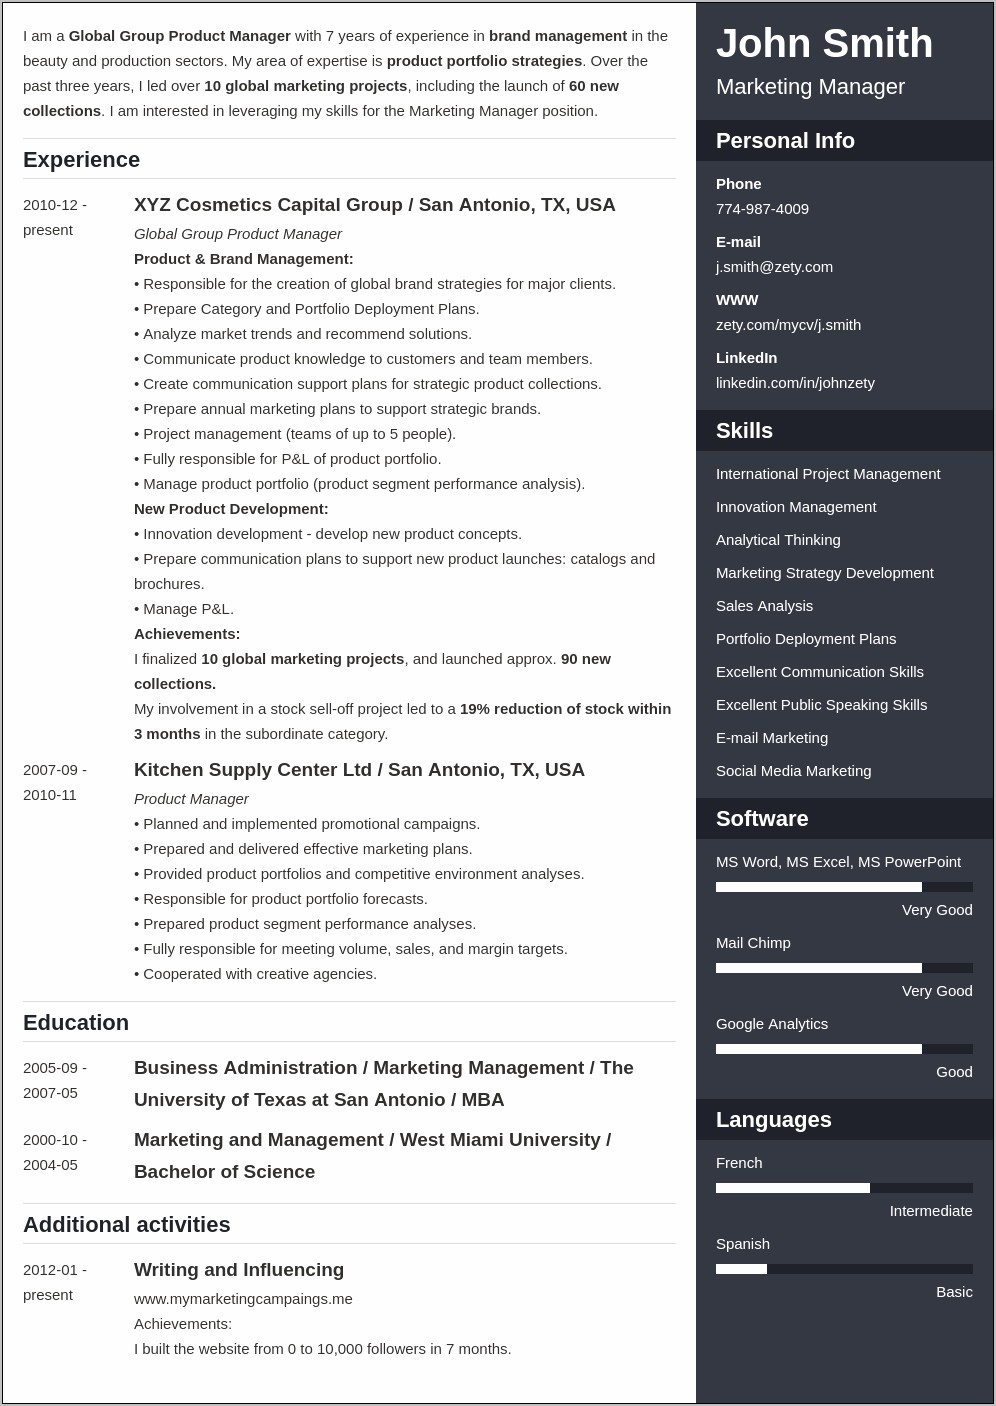 Educational Attainment Example In Resume